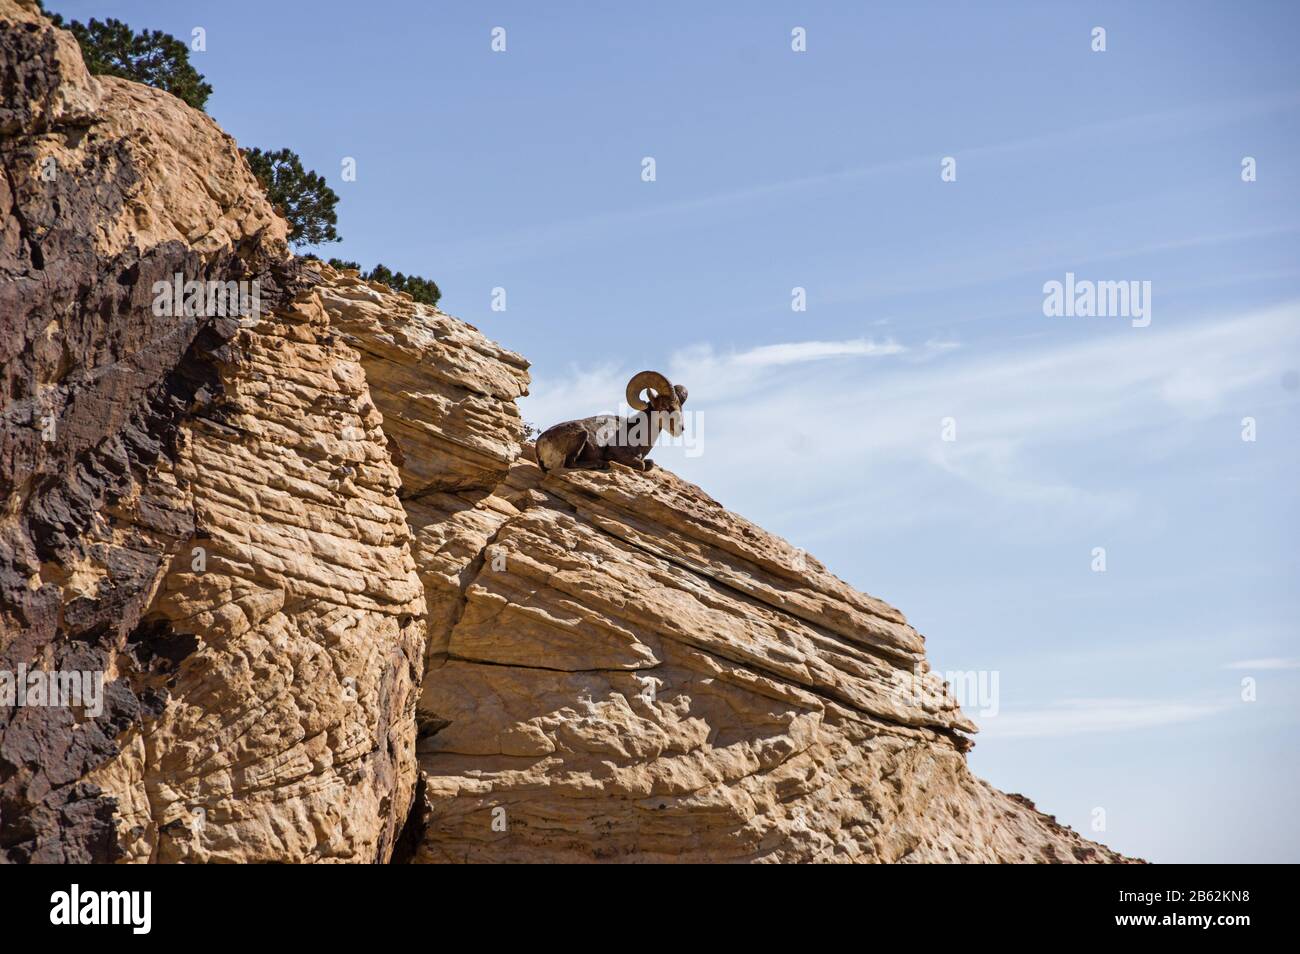 desert bighorn sheep or Ovis canadensis sitting on a mountain ledge in Red Rock Canyon National Conservation Area near Las Vegas Nevada Stock Photo